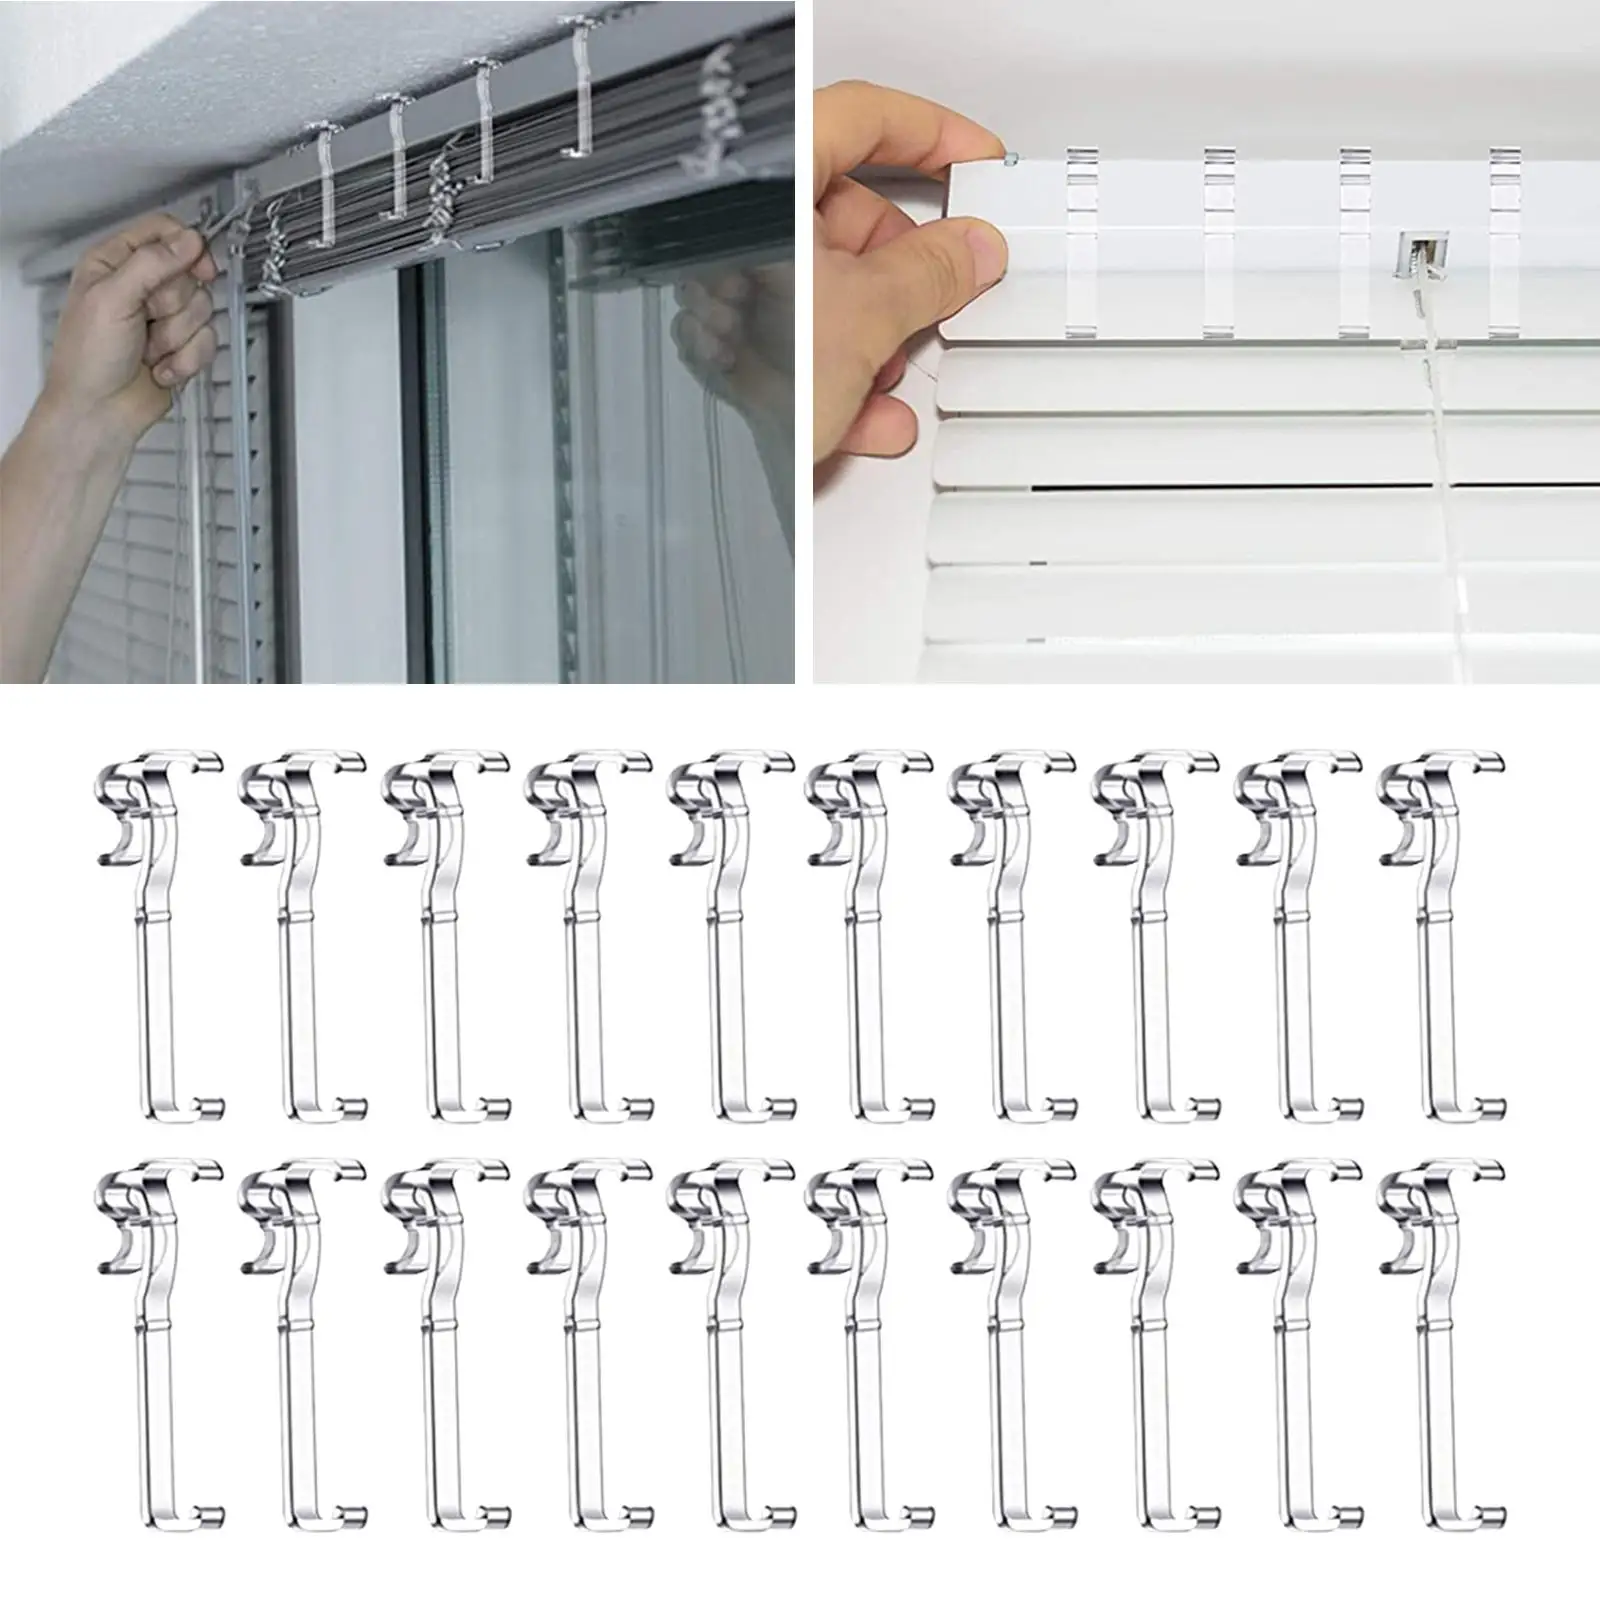 20 x Blind Clips Retainer Clip Holder Decorative Plastic Invisible Valance Clips for Blinds for Vertical Blinds Accessories Shop